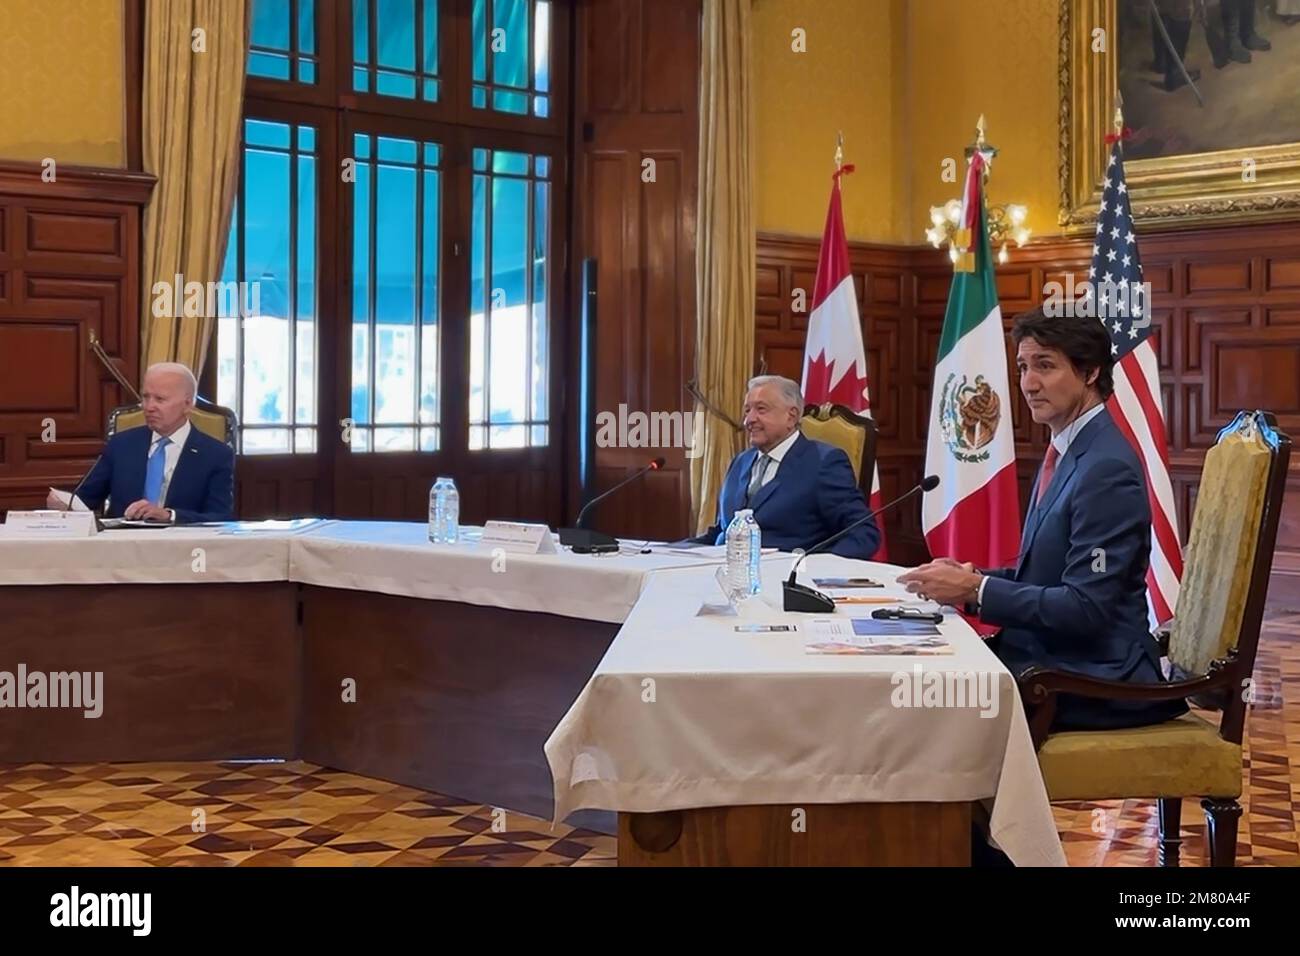 (L-R) US President Joe Biden, Mexican President Andres Manuel Lopez Obrador and Canadian Prime Minister Justin Trudeau attend the 10th North American Leaders Summit at the National Palace in Mexico City, Mexico on January 10, 2023. Photo by Mexican President Press Office / UPI Stock Photo